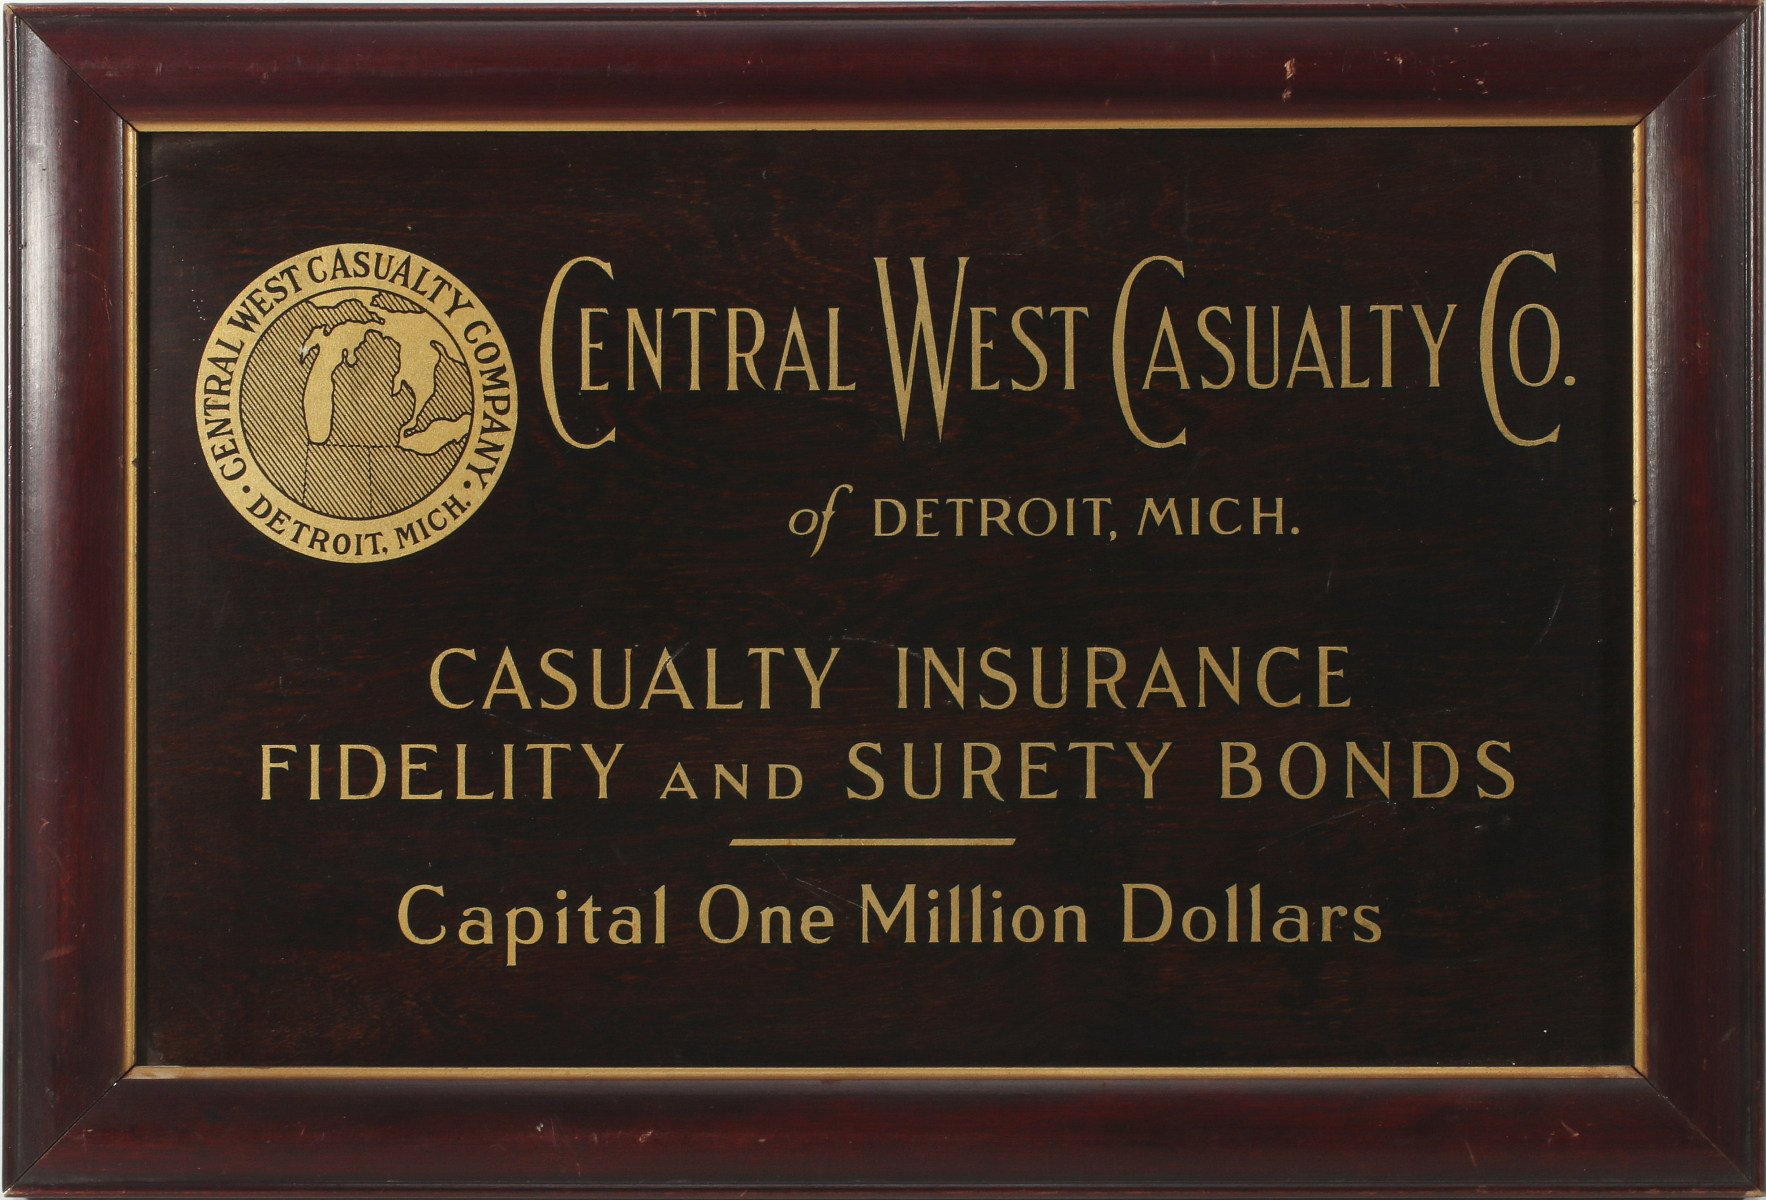 CENTRAL WEST CASUALTY COMPANY INSURANCE SIGN C. 1930